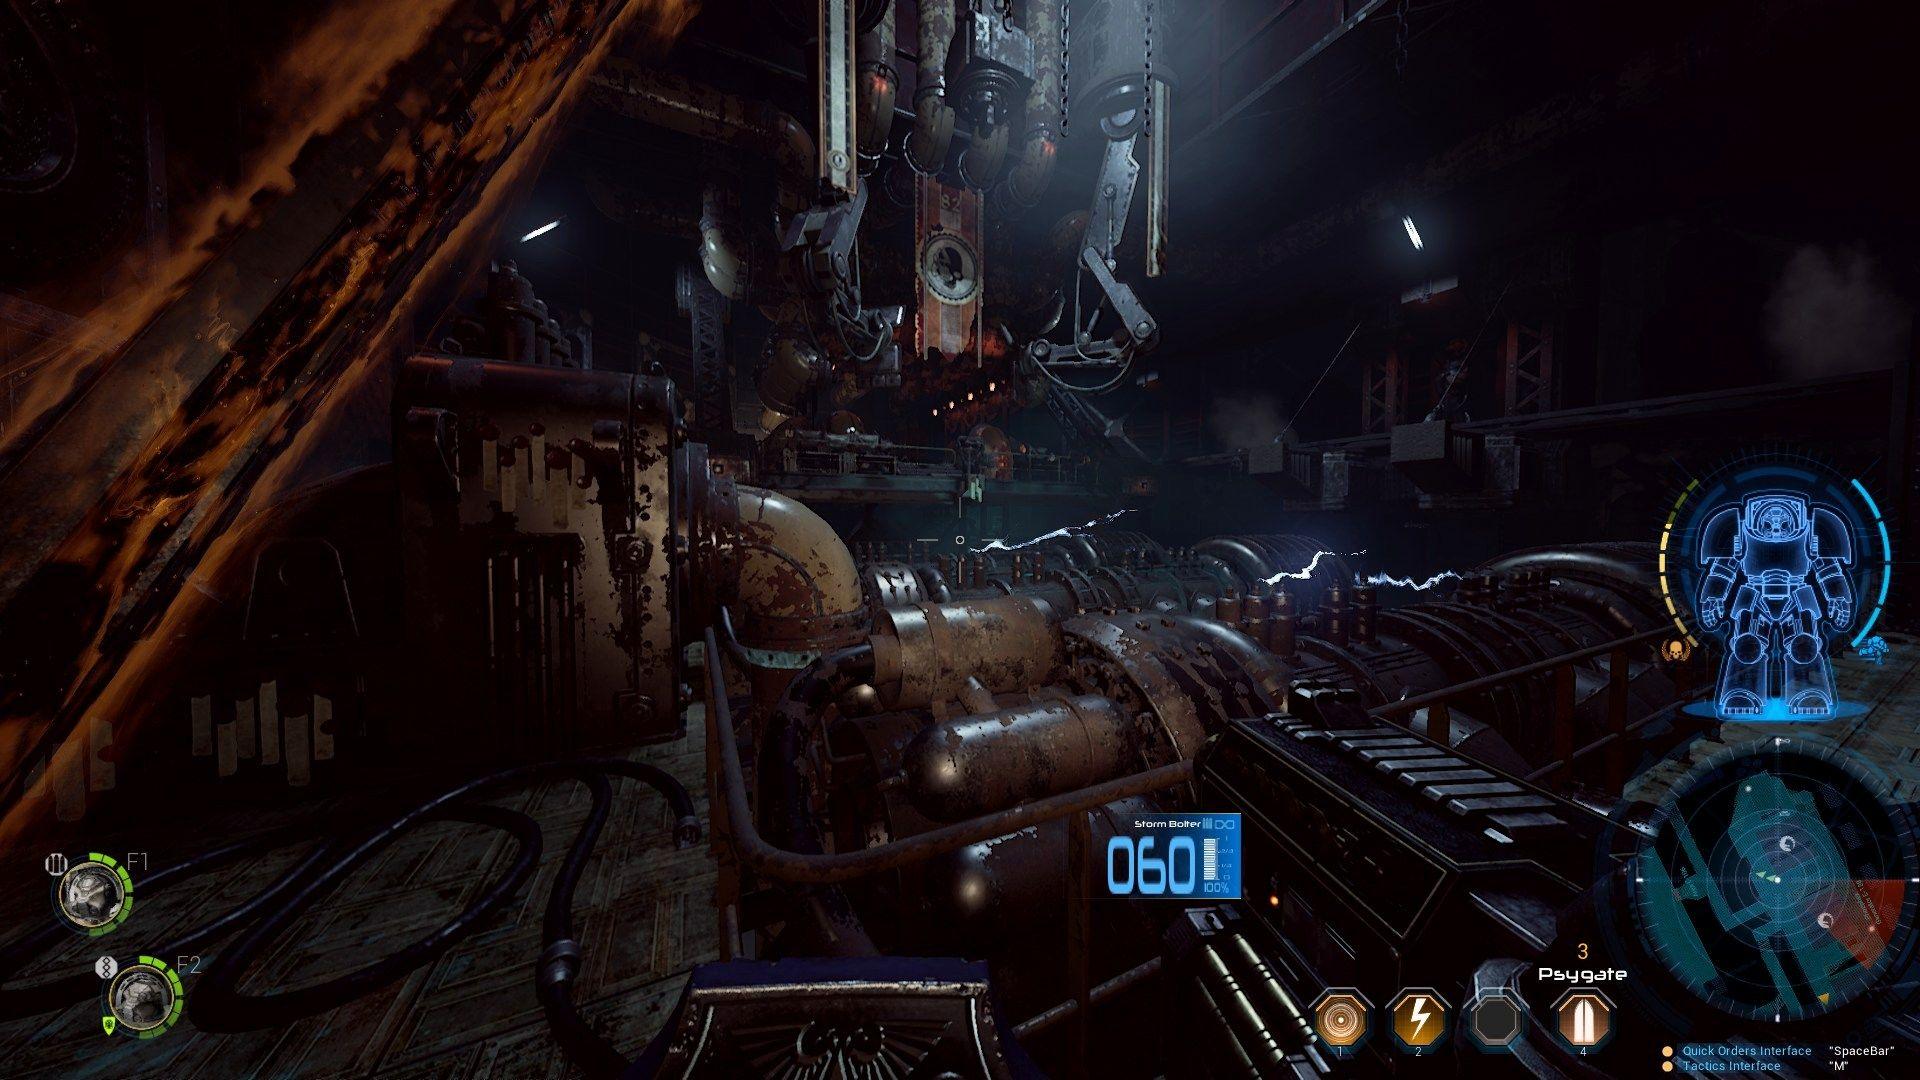 space hulk deathwing xbox one cost